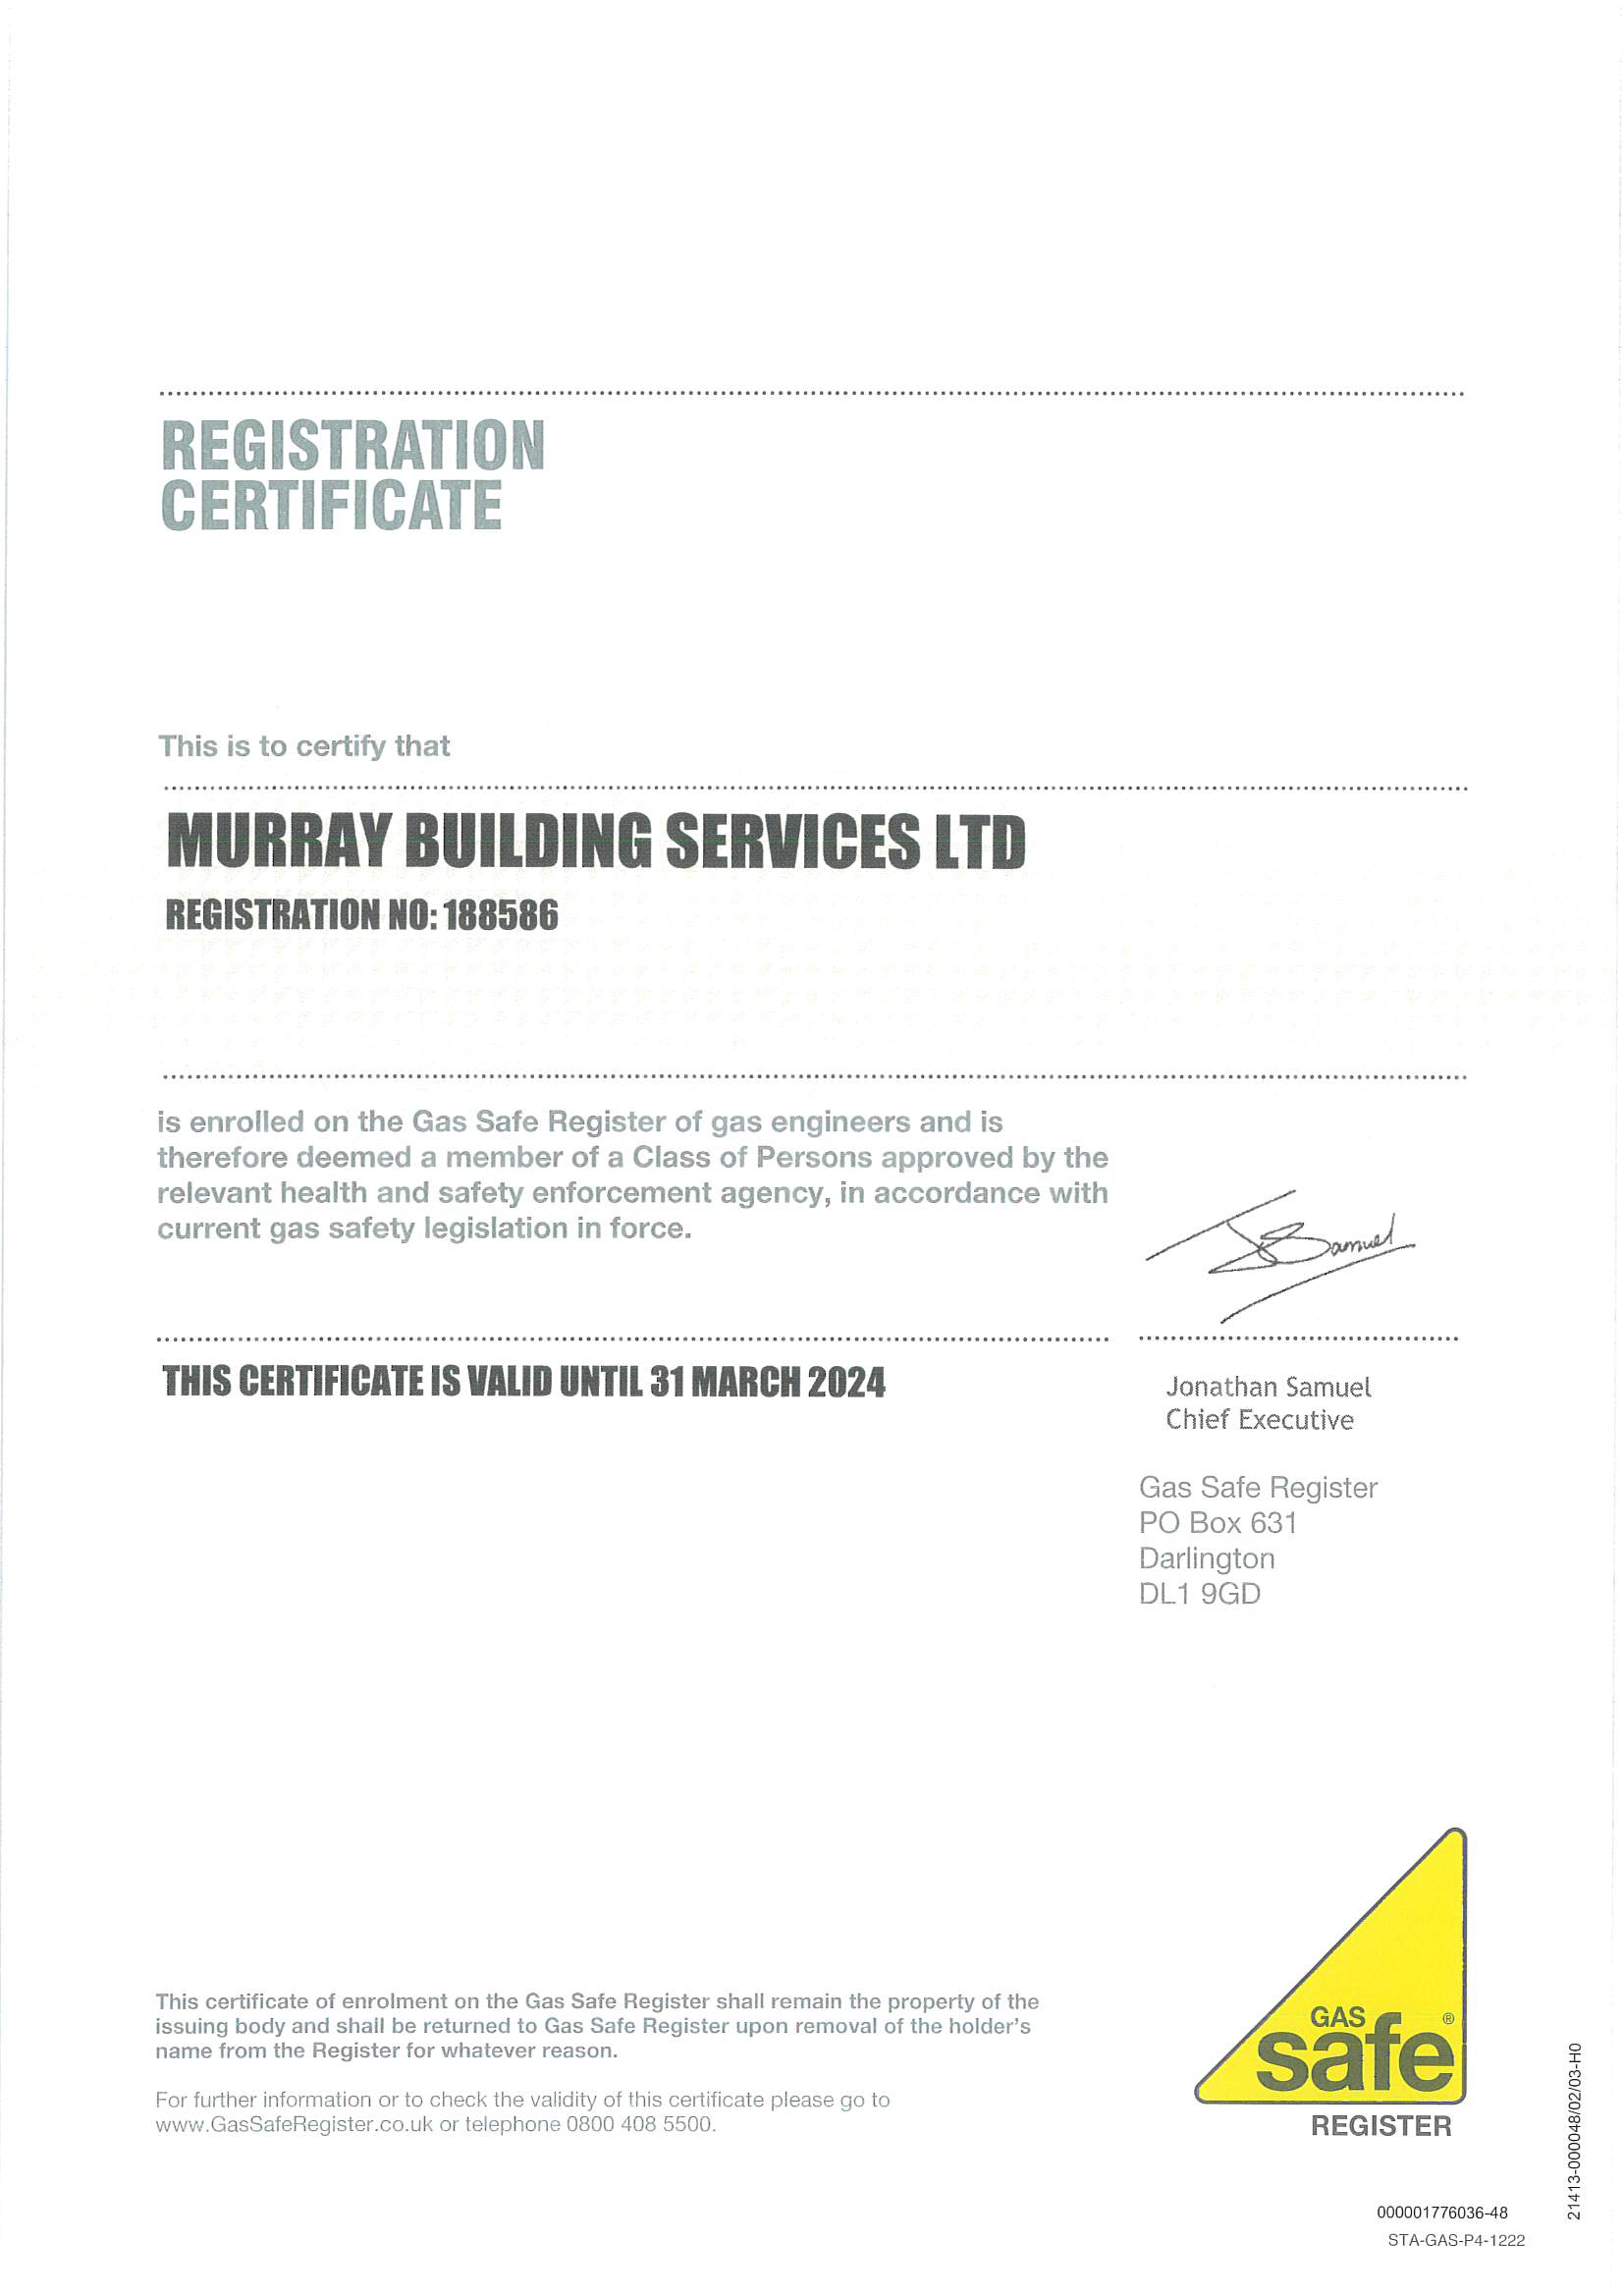 Gas safe Certificate for Murray Building Services